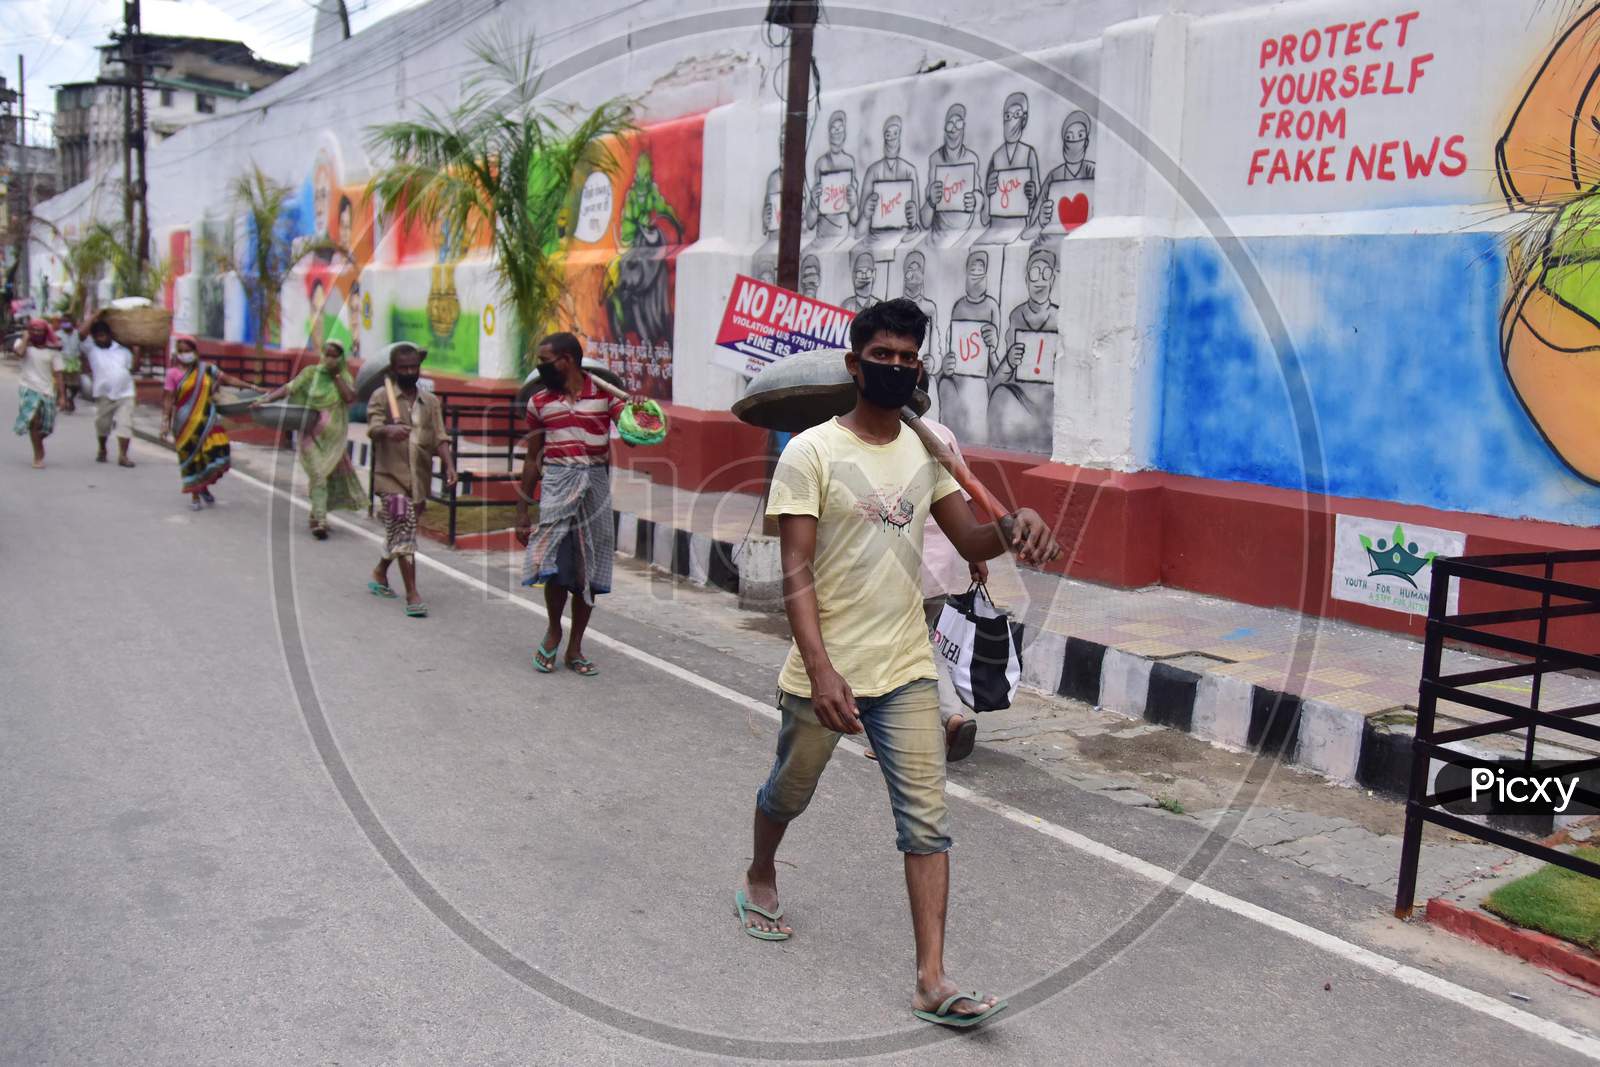 Labourers walk Past A Mural  With A Message To Take Precautions Against Coronavirus In Guwahati , India On June 14, 2020.